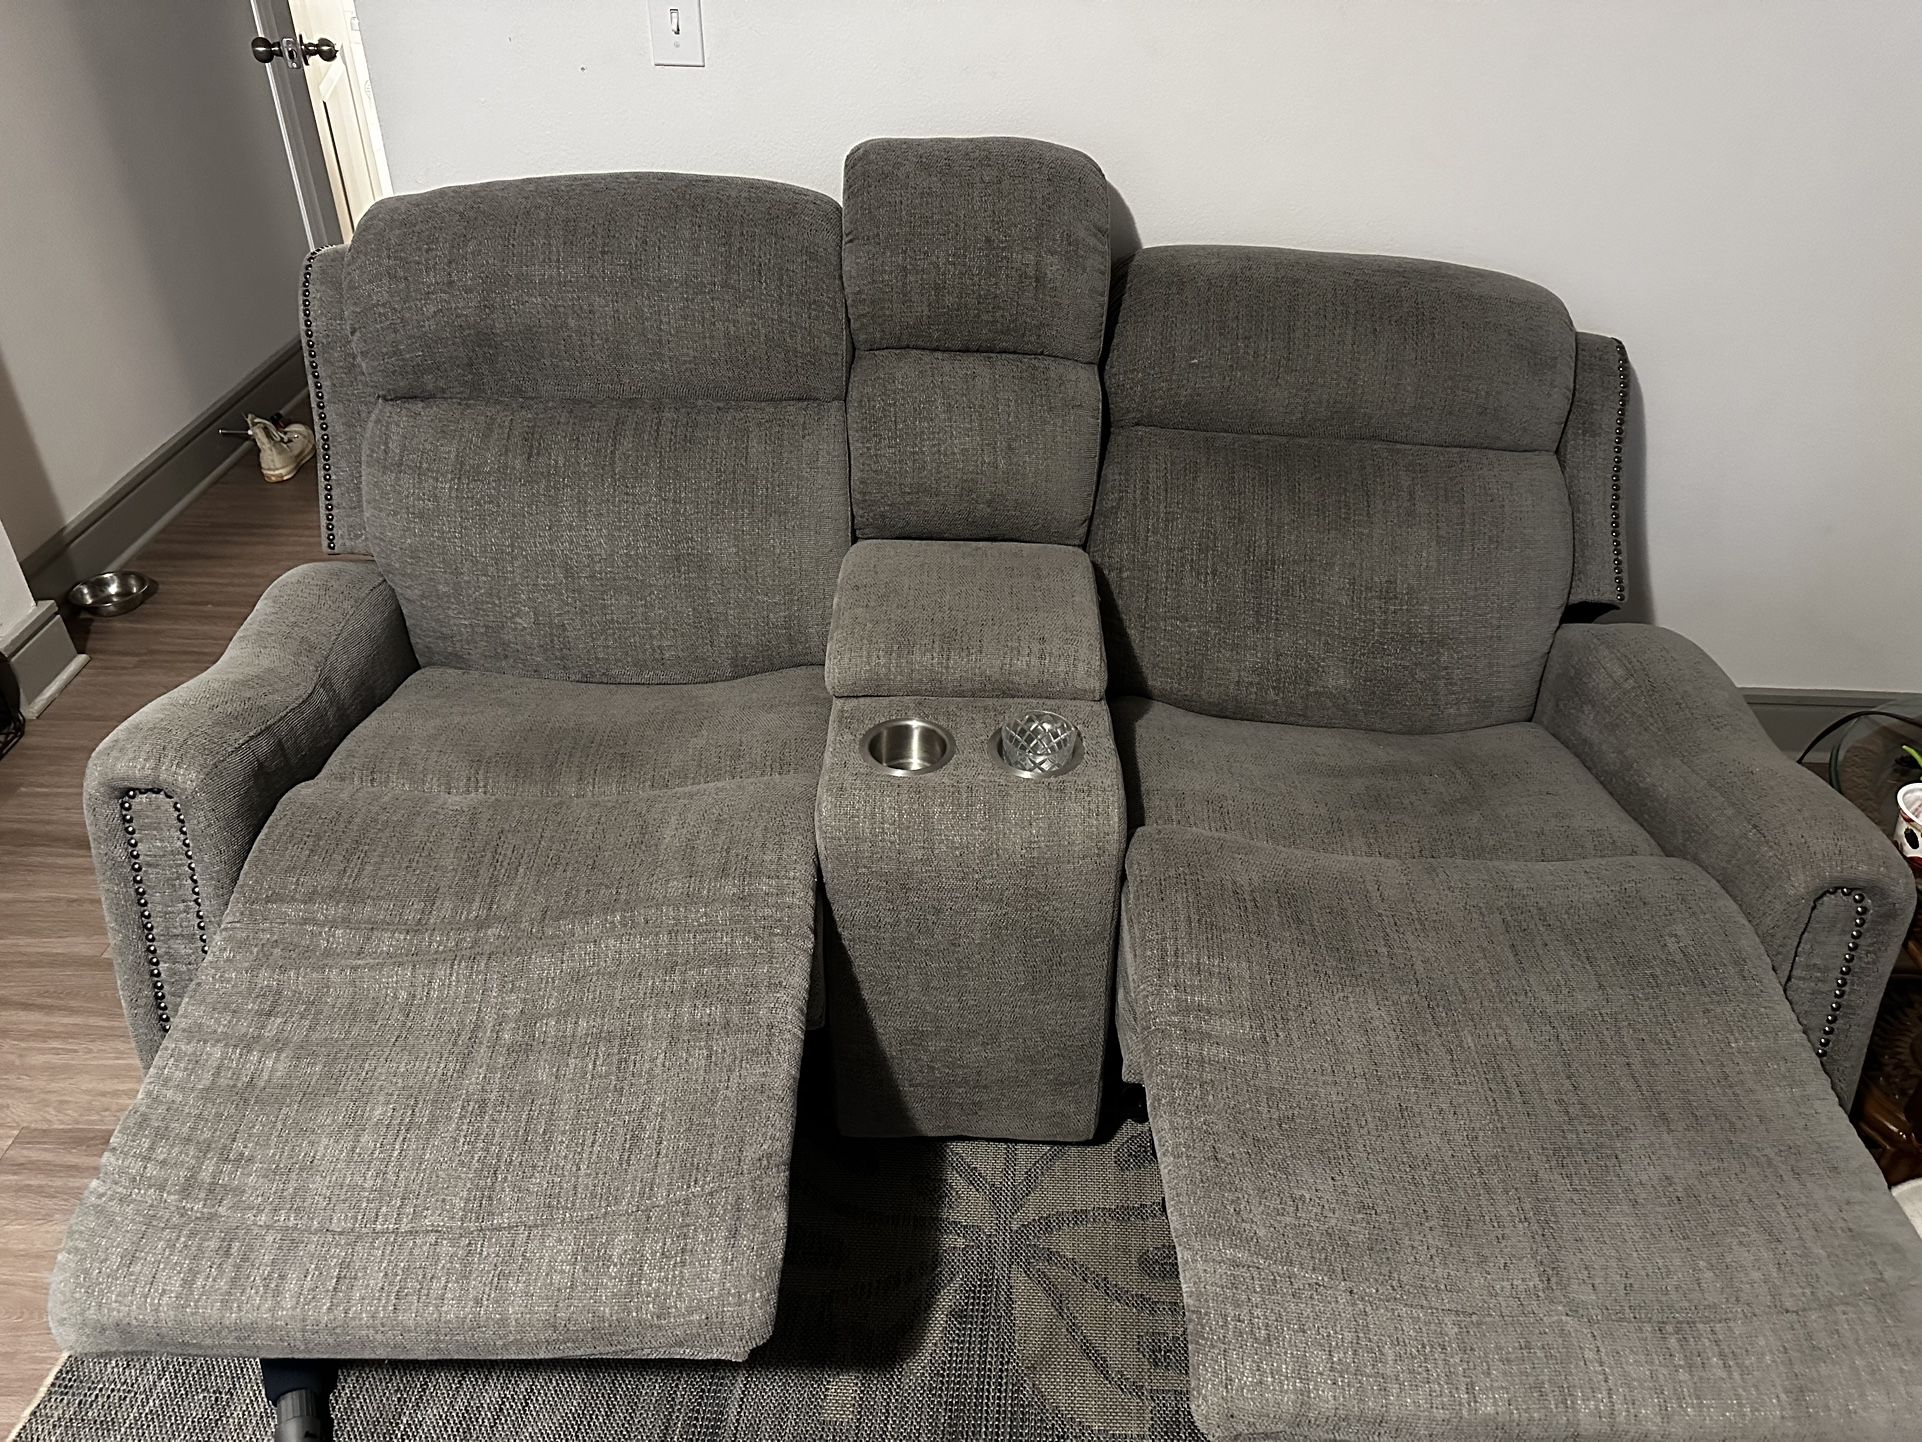 Electric Recliners And Love Seat 